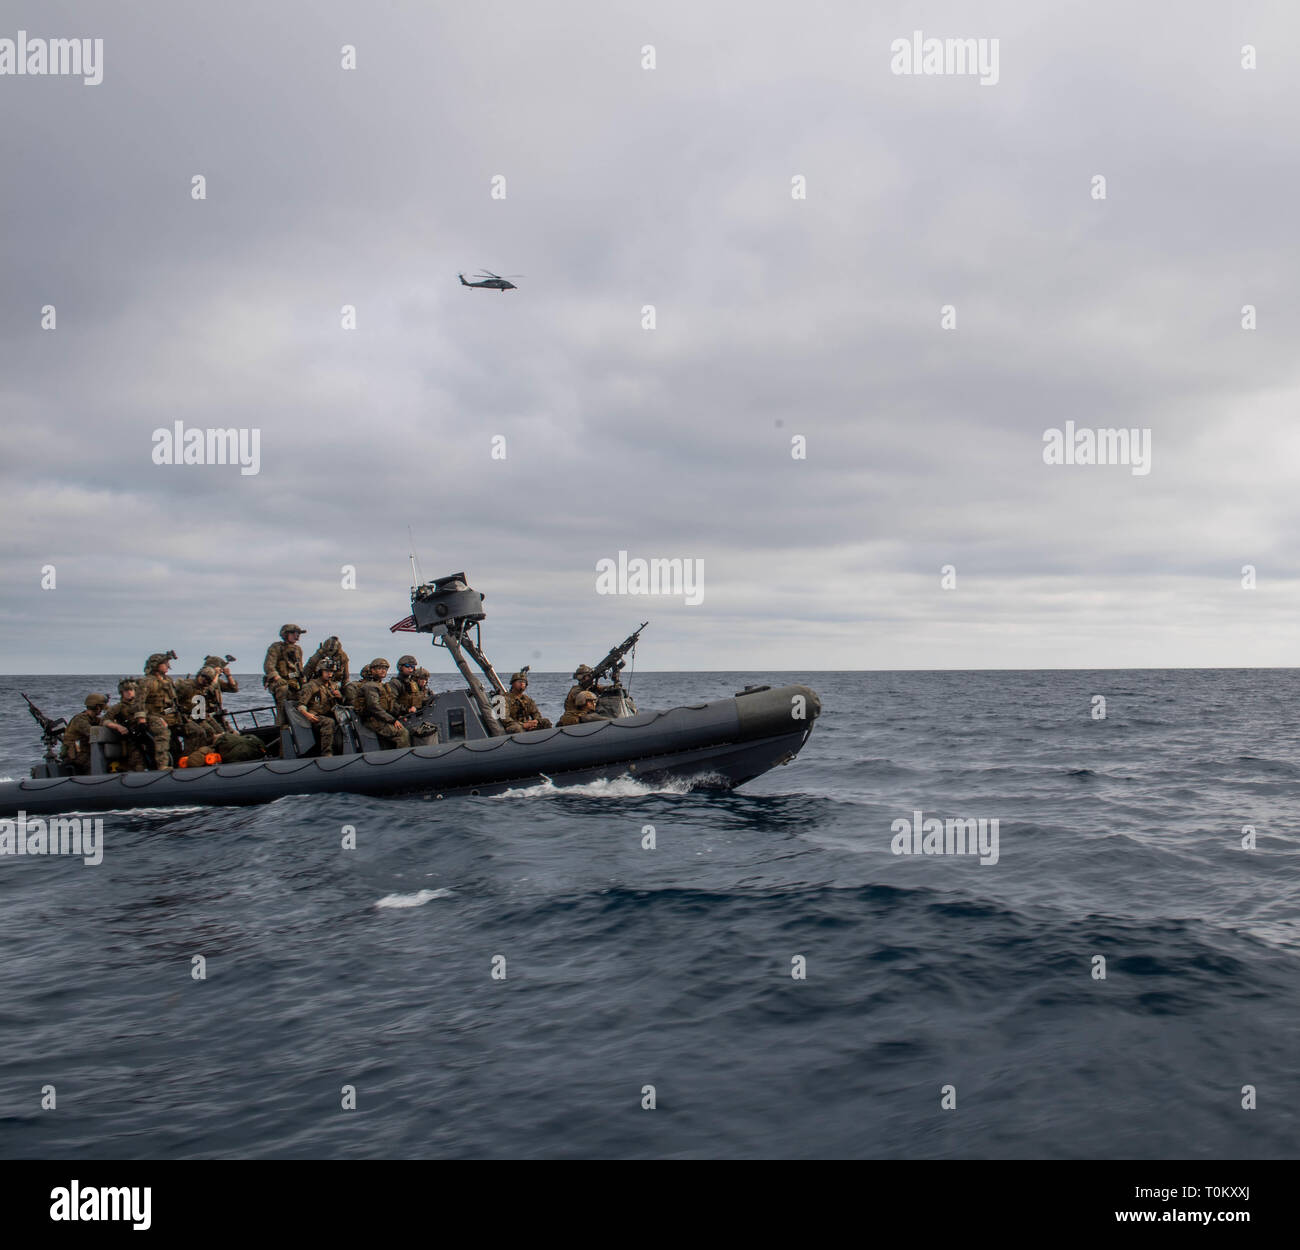 190319-N-HD110-0506  PACIFIC OCEAN (March 19, 2019) Sailors attached to Assault Craft Unit (ACU) 1 and Marines attached to Maritime Raid Force (MRF) transit to a contact vessel during a visit, board, search, and seizure exercise conducted by the Harpers Ferry-class amphibious dock landing ship USS Harpers Ferry (LSD 49). Harpers Ferry is underway conducting routine operations as a part of USS Boxer Amphibious Ready Group (ARG) in the eastern Pacific Ocean. (U.S. Navy photo by Mass Communication Specialist 3rd Class Danielle A. Baker) Stock Photo